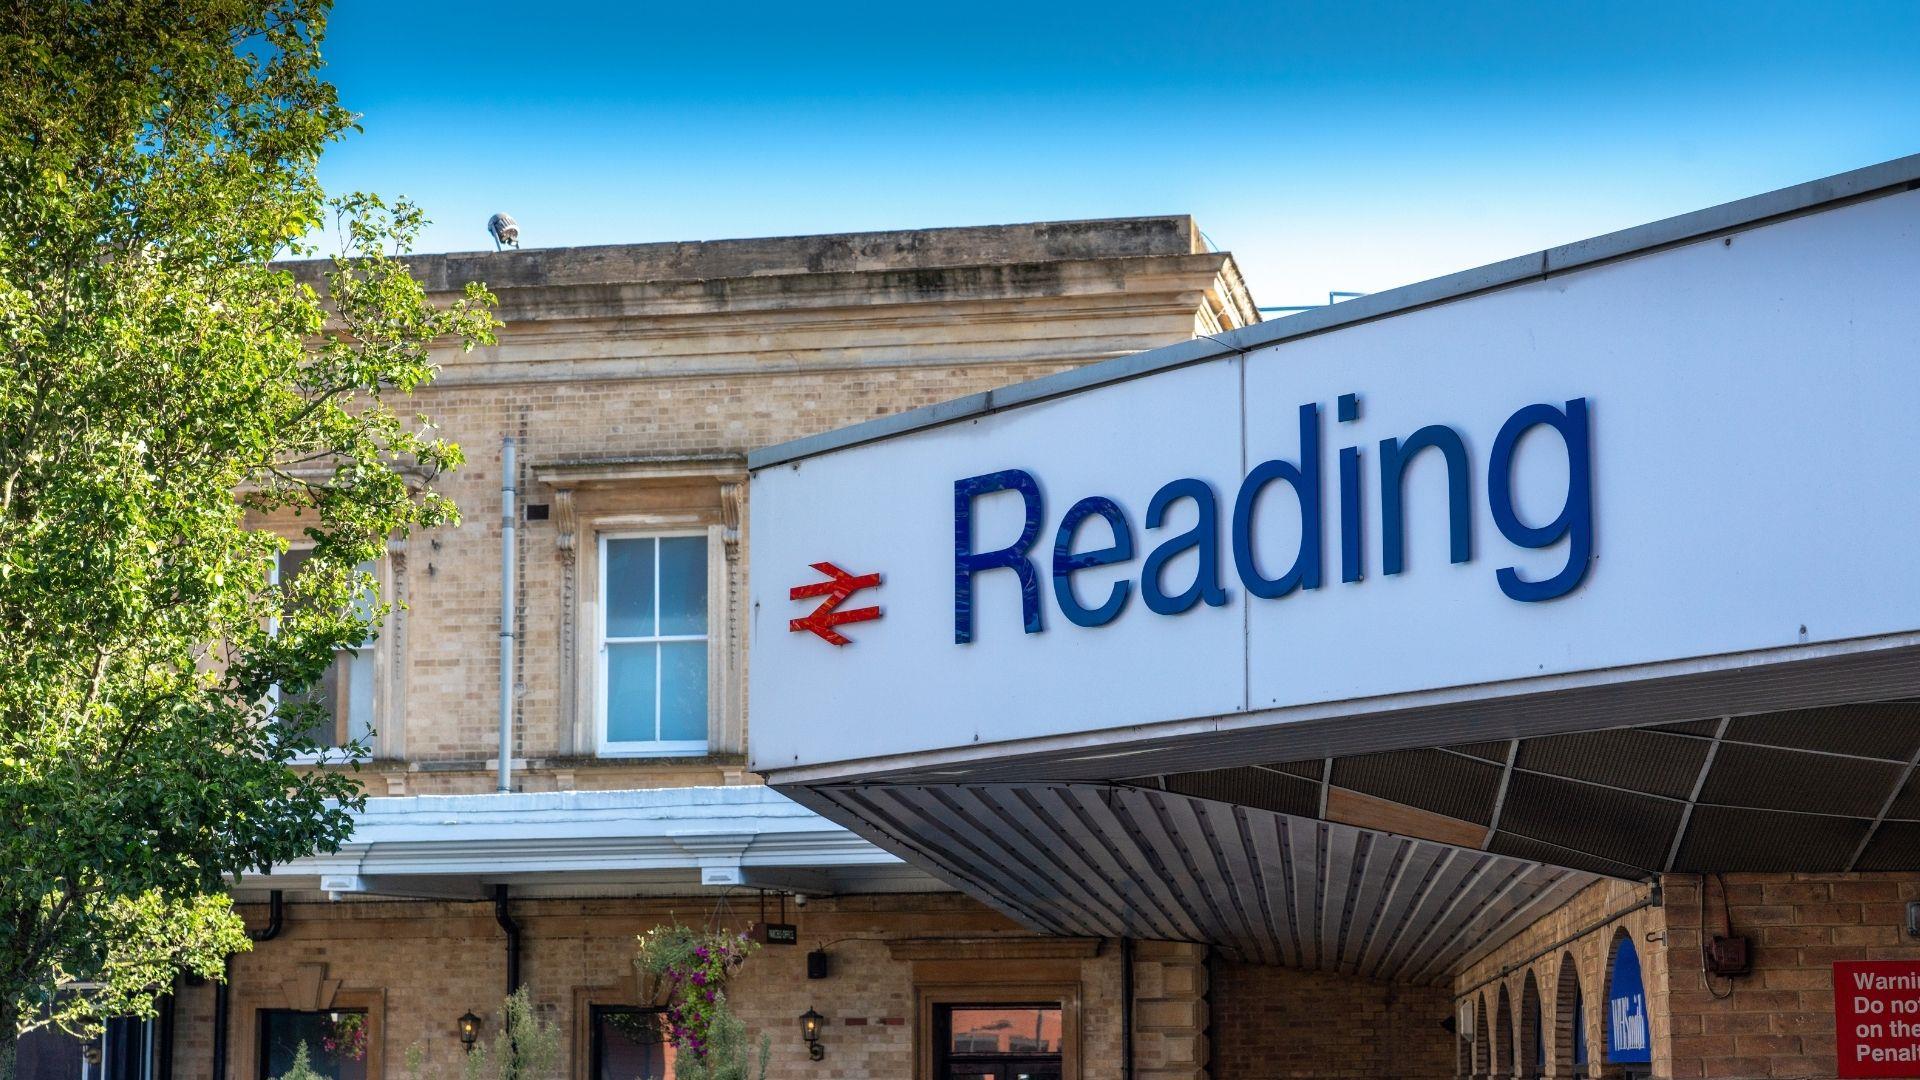 Reading Station sign close up